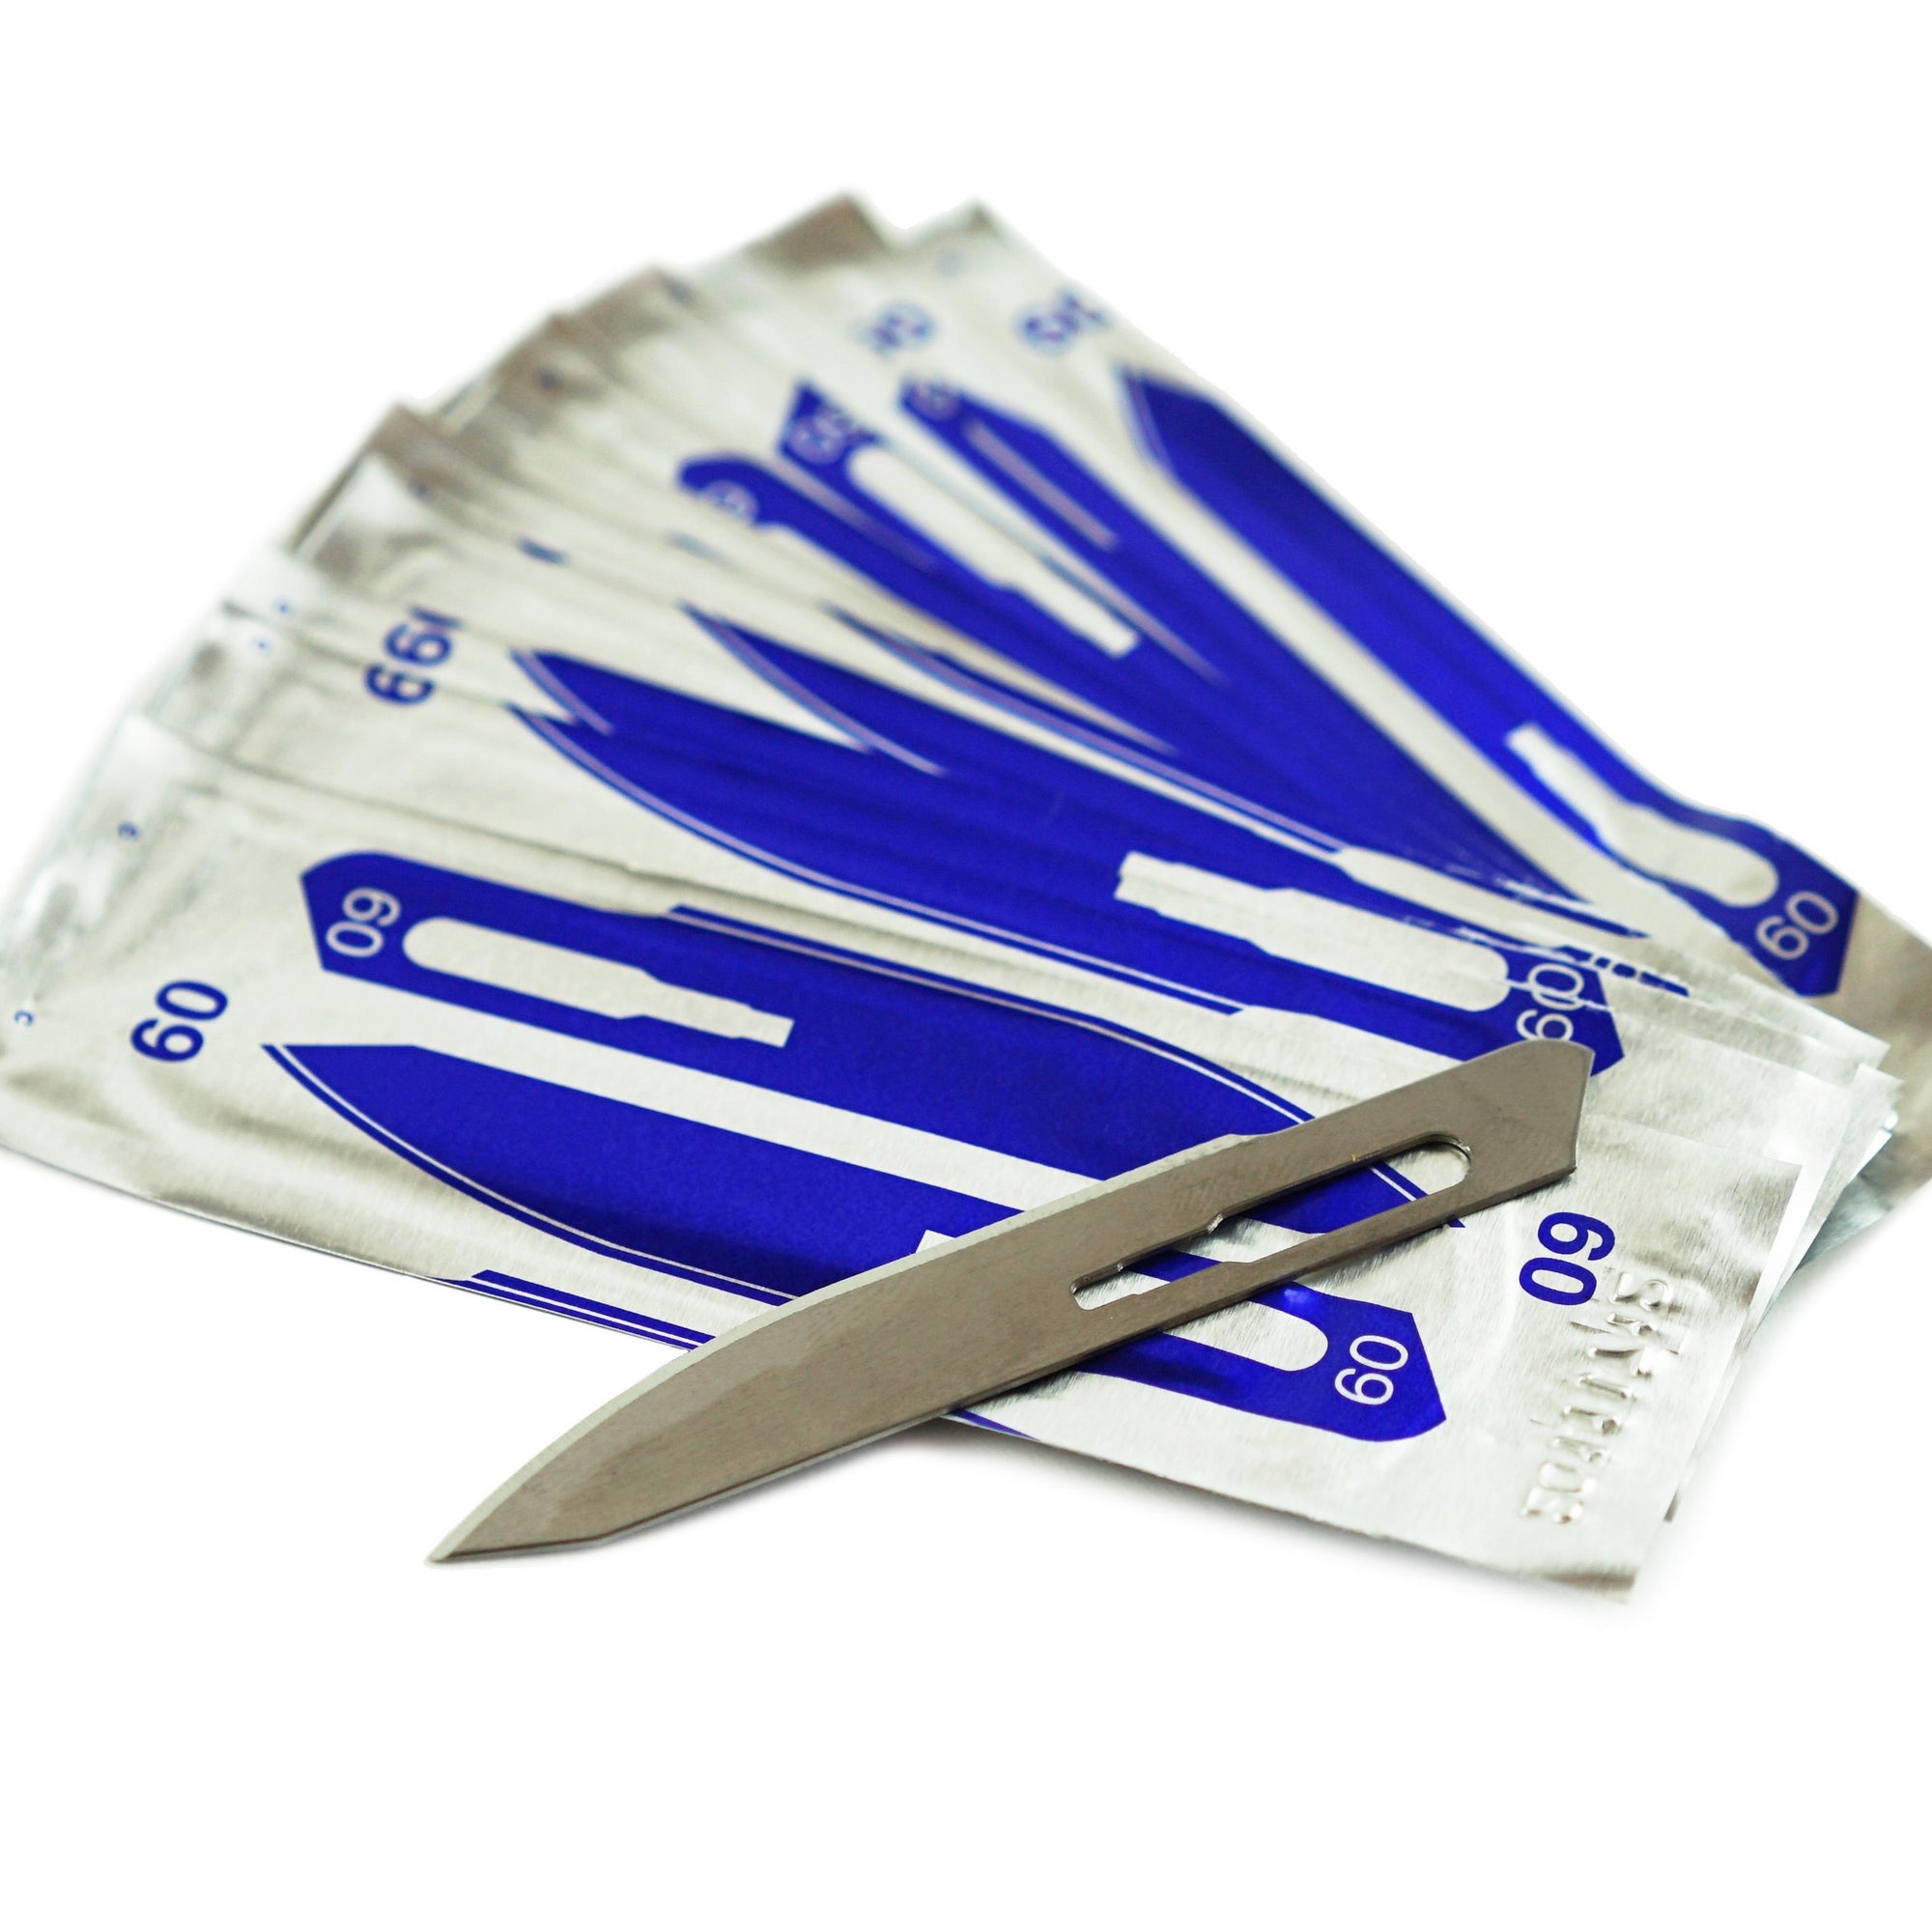 5pk Replacement Blades for [IBK] Scalpel Fixed Blade